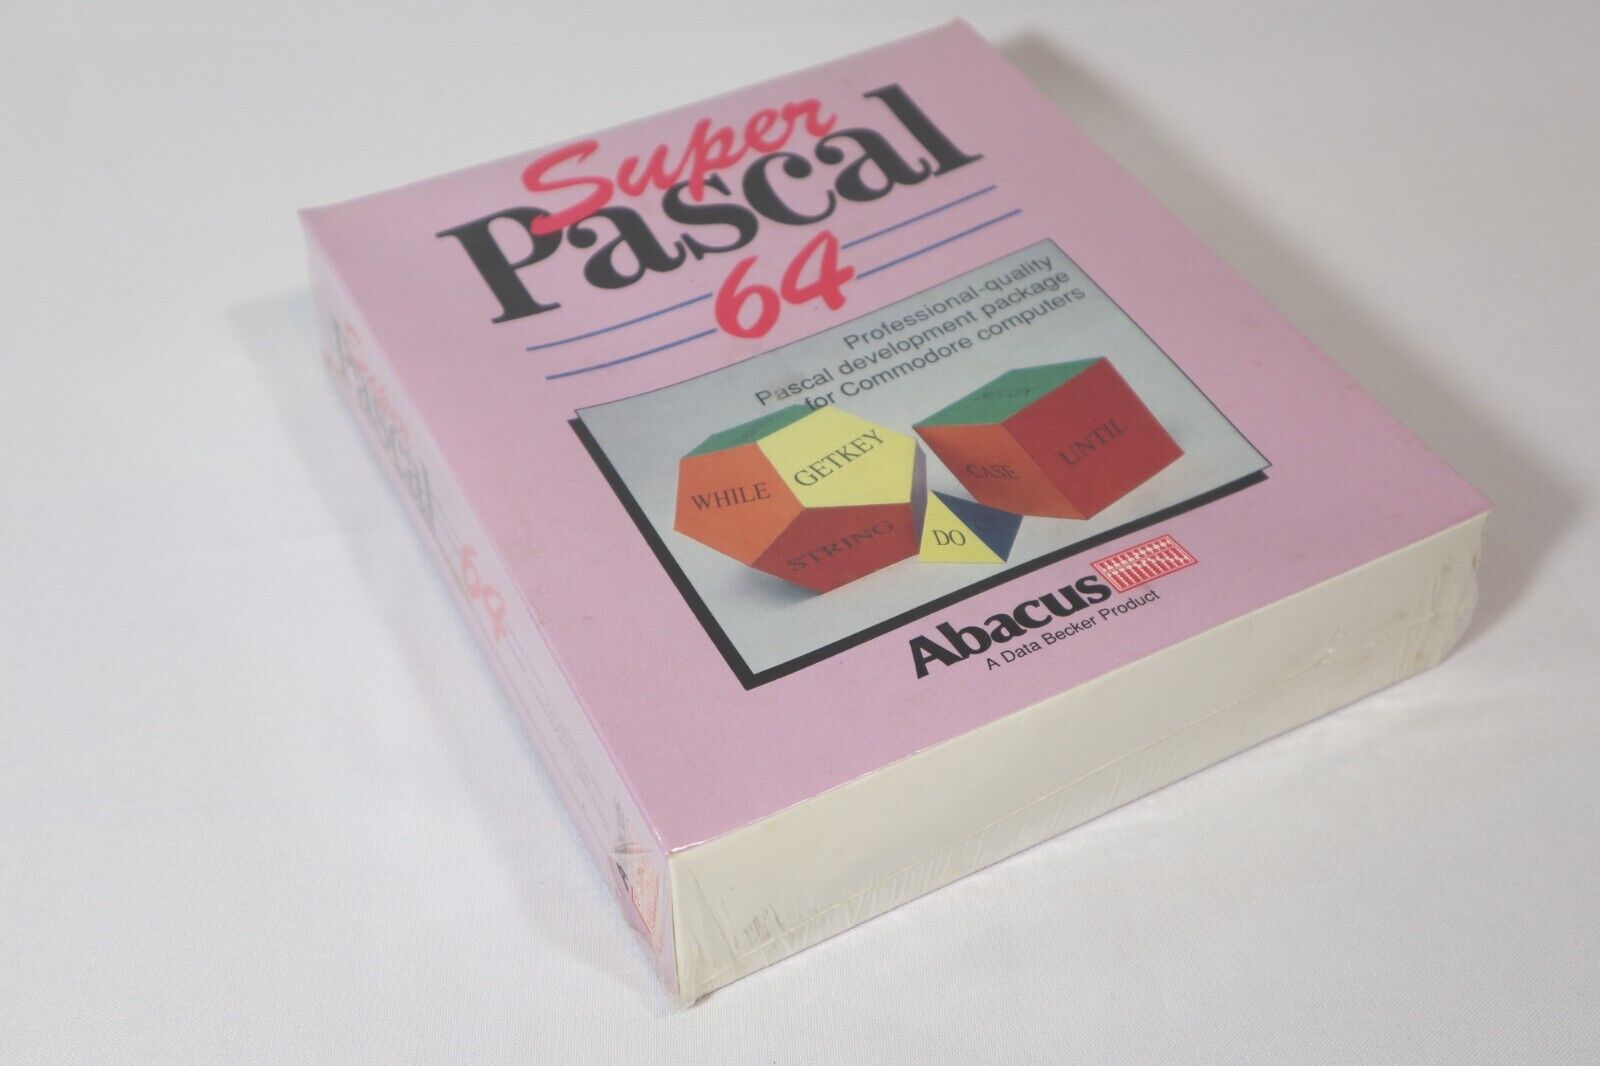 Super Pascal 64 by Abacus - NIB & Sealed